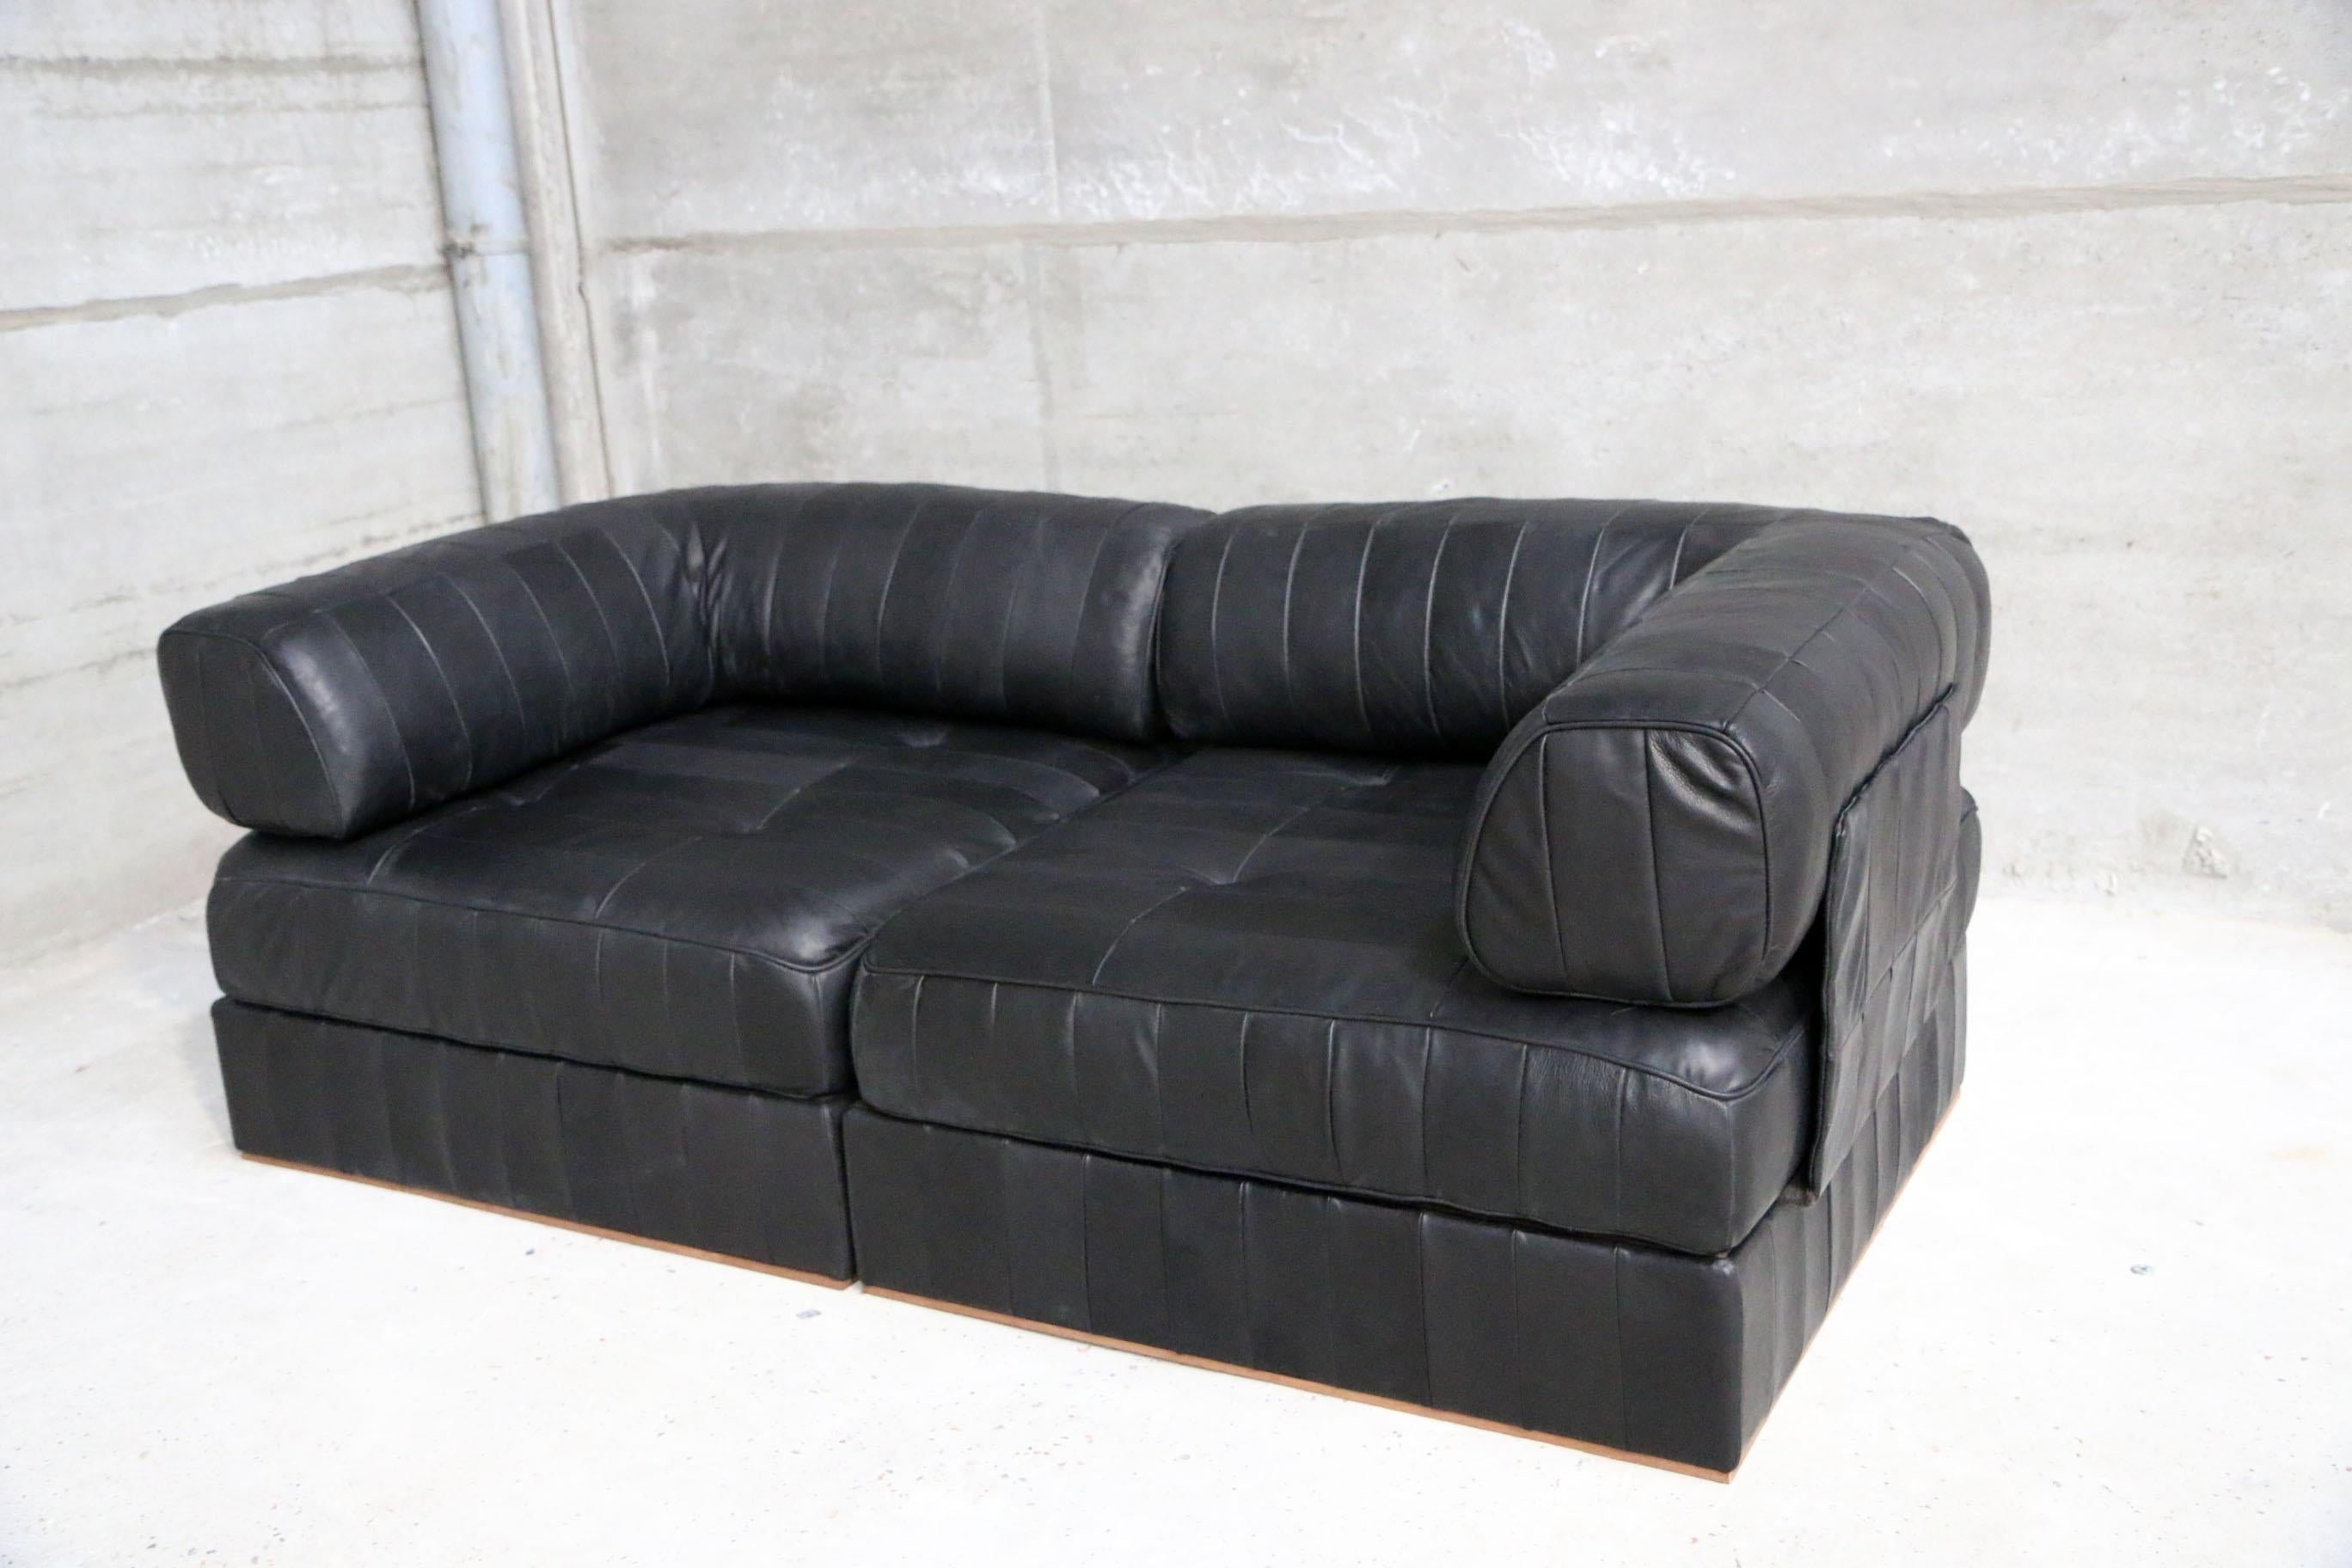 Iconic DS88 modular patchwork sofa restored in our signature vintage aniline black leather. New foam and new leather. You can play with the modular composition of the sofa.
See pictures for dimensions and how its build up or